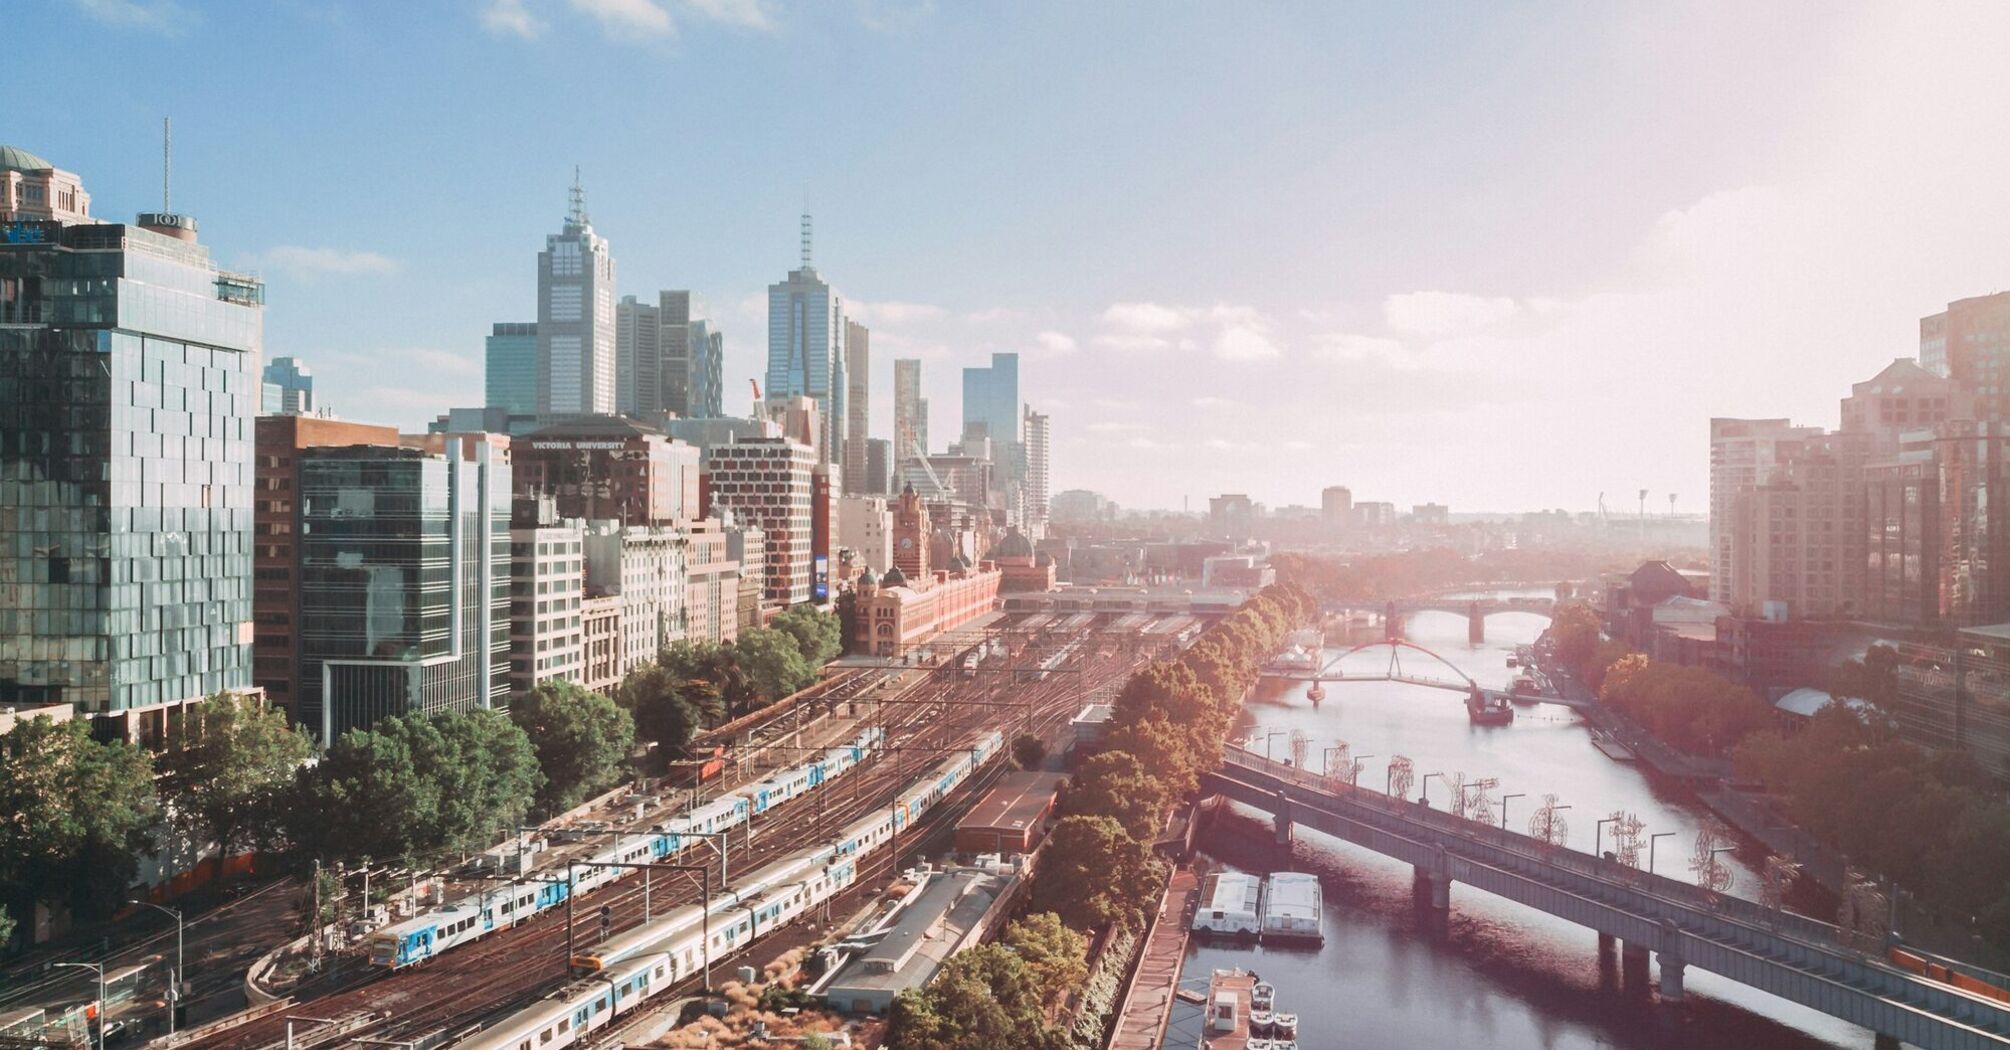 Aerial view of Melbourne cityscape with skyscrapers, the Yarra River, and trains on tracks on a sunny day